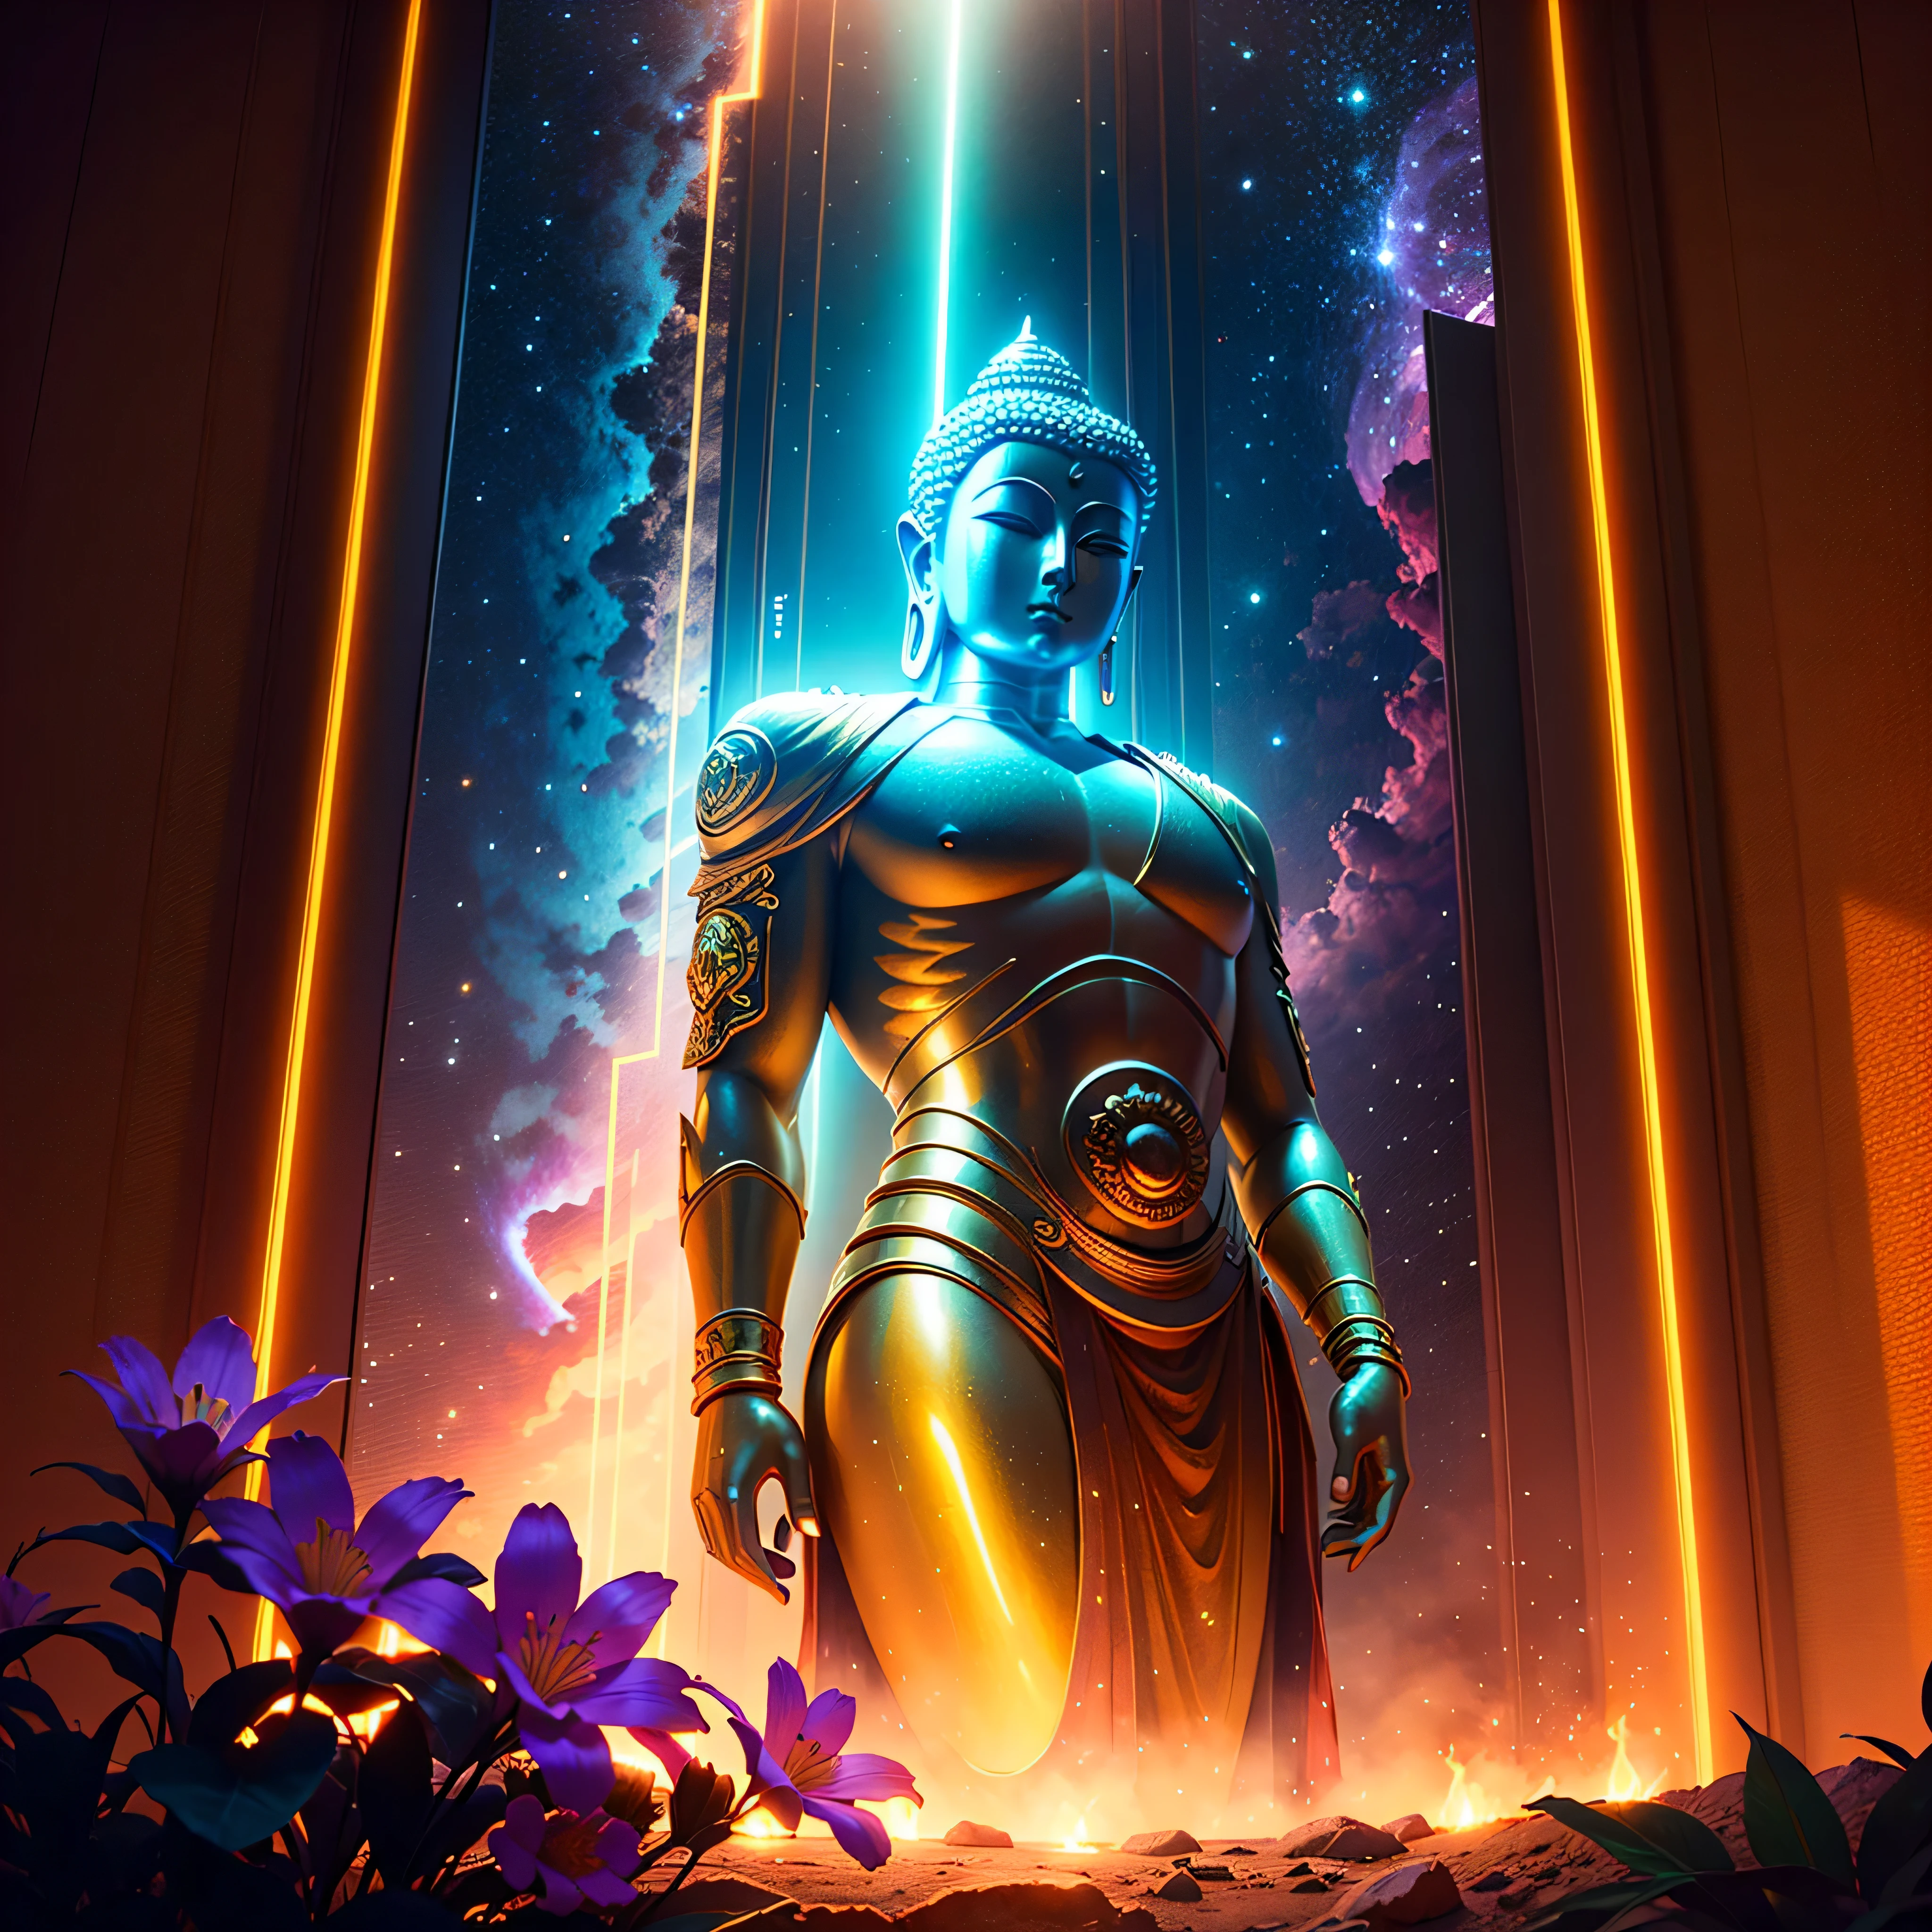 Will-o'-the-wisp dazzling Symmetrical Duddha_Interstellar (Galaxy stars Nebula Spacious Sunrise evening_glow distant_view Sunset rich_colors colorful wide-angle_lens shooting_evening positive_film naturalistic_style)，A highly detailed, futuristic scene with a vibrant color palette and neon lights. The focal point of the scene a magnificent Golden Buddha statue, radiating a sense of peace and tranquility. The statue made of pure gold and shines brightly, reflecting the neon lights around it. The surrounding environment filled with futuristic elements, such as sleek buildings, flying cars, and holographic advertisements. The colors in the scene are intense and vibrant, incorporating shades of blues, purples, pinks, and greens. The neon lights illuminate the surroundings, casting a surreal and vibrant glow. The overall atmosphere both awe-inspiring and serene, blending the traditional beauty of the Golden Buddha with the cutting-edge aesthetics of the future. Everything in the scene highly detailed and realistic, with every intricate feature of the Buddha statue captured flawlessly. The lighting carefully designed to highlight the beauty of the statue and create a mesmerizing ambiance.optimal bright_color dappled_sunLight meticulously intricate ultra_high-details ultra_high-res hyper pro-Photo-realistic ultra_high-quality ultra_high-def UHD XT3 DSLR HDR extreme improved Octane-rendered opengl-shaders glsl-shader romm rgb pbr shading 3DCG fxaa global illumination cgi vfx sfx fkaa txaa rtx ssao post-processing post-production cell-shading tone-mapping Ultra_sharpness focus accurate max saturate reflex analogique Vivid DSLR color-coded luminescence volumetric Cinematic_Sunrise lightning contrast incandescent Cristallines floraison zentangle fleuraison varied multi etc. --s 1000 --c 20 --q 20 --chaos 100